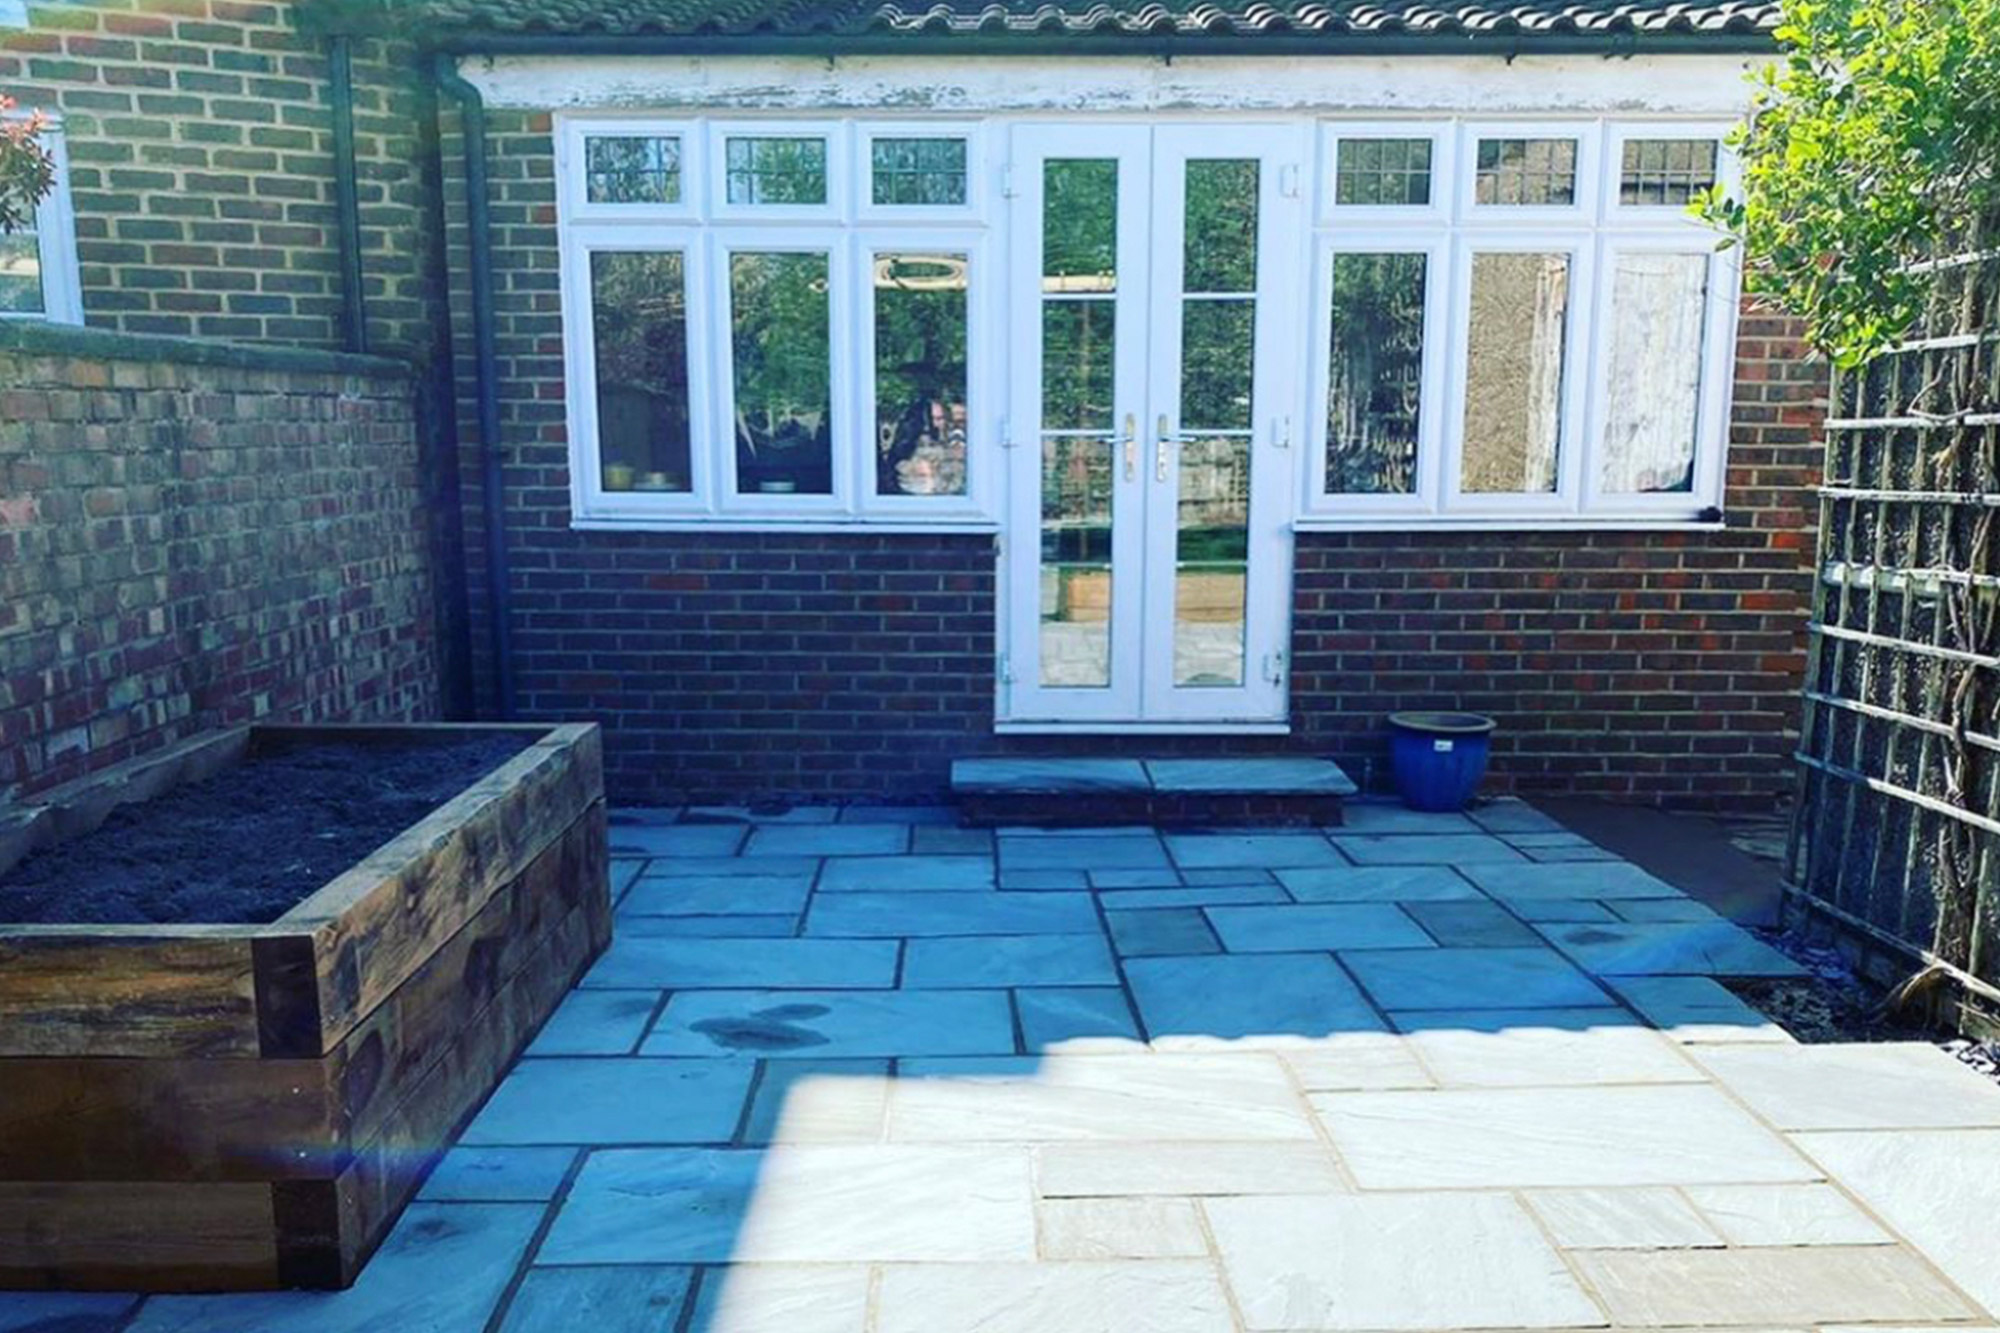 Paving and Patio Showcase